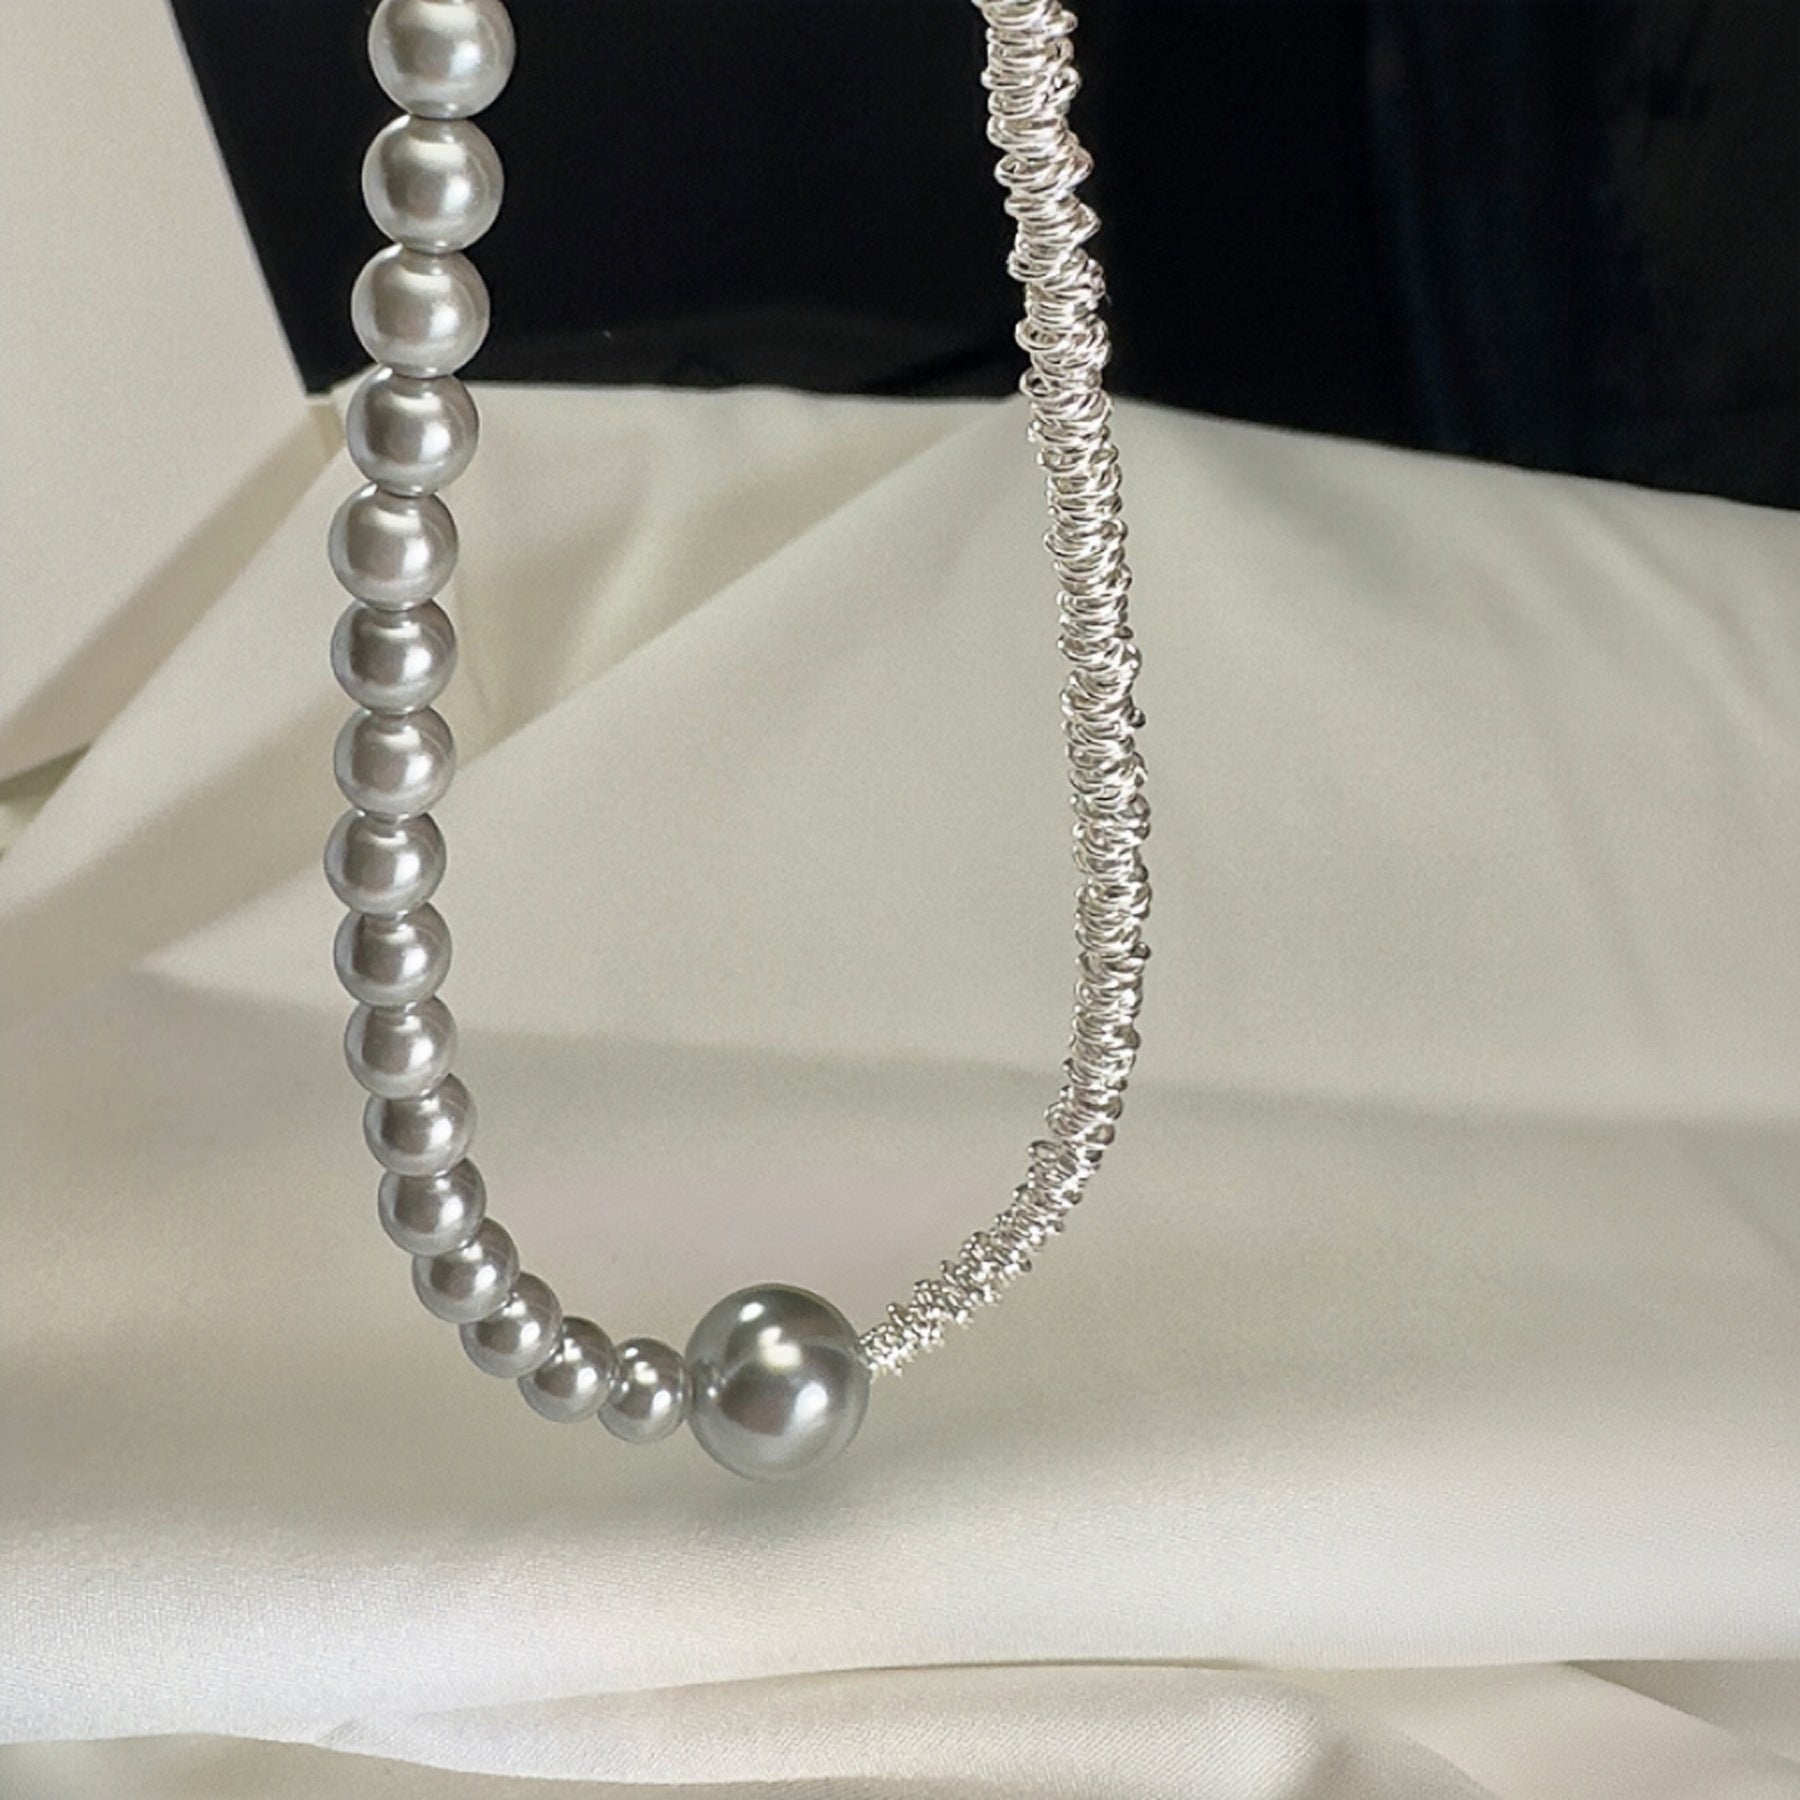 12mm 6mm Asymmetric FAUX Pearl Beads Necklace